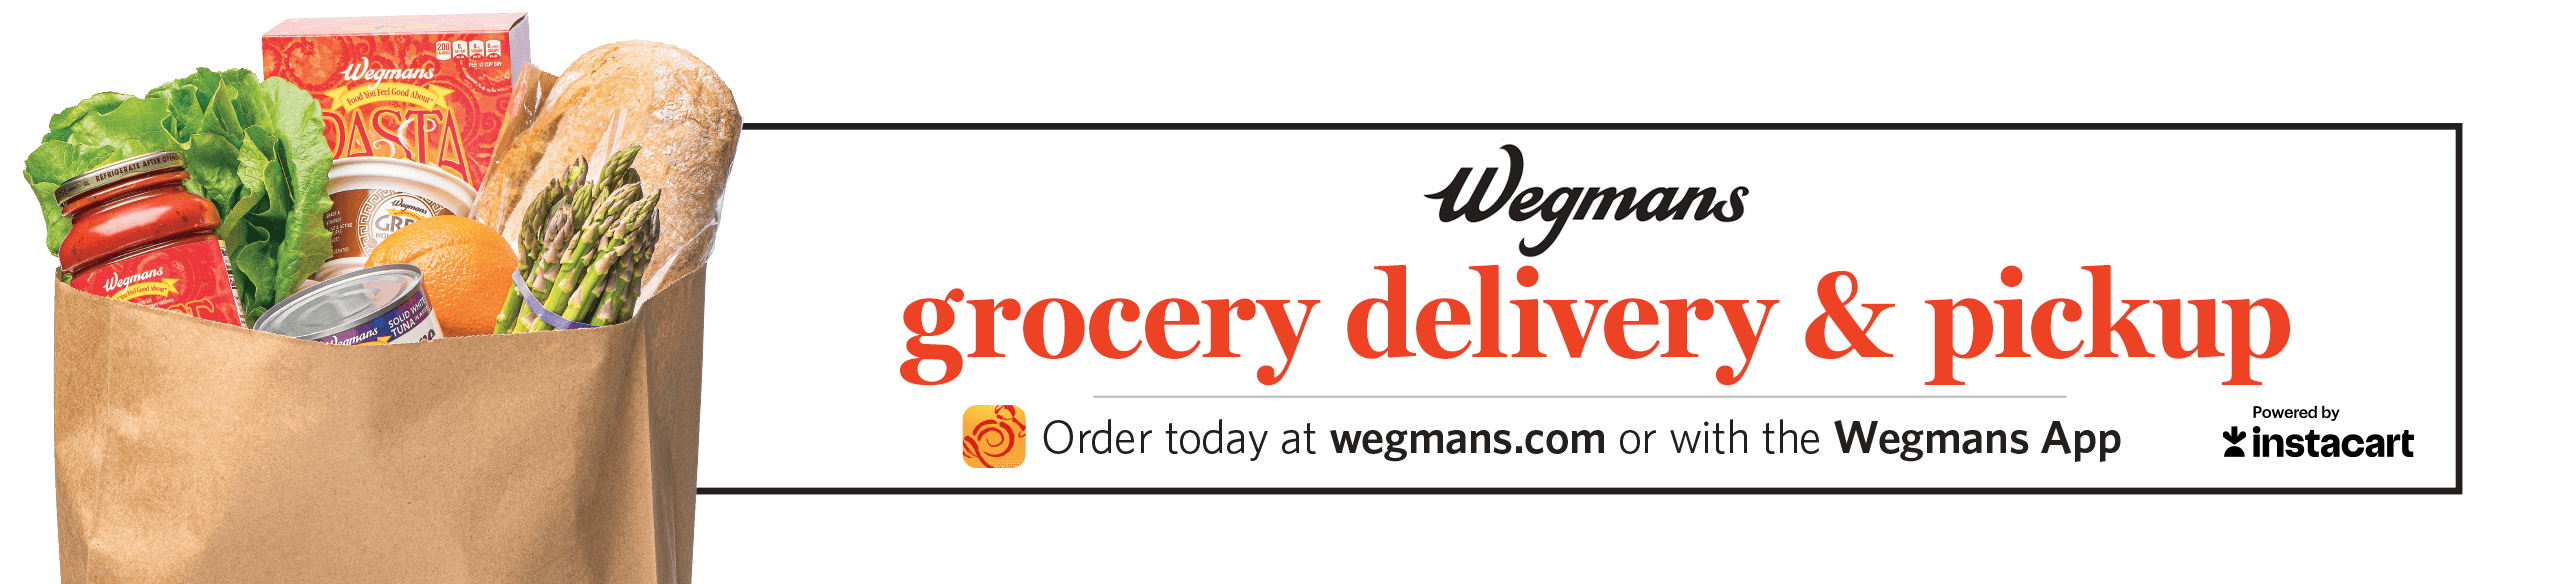 Wegmans grocery delivery and pickup